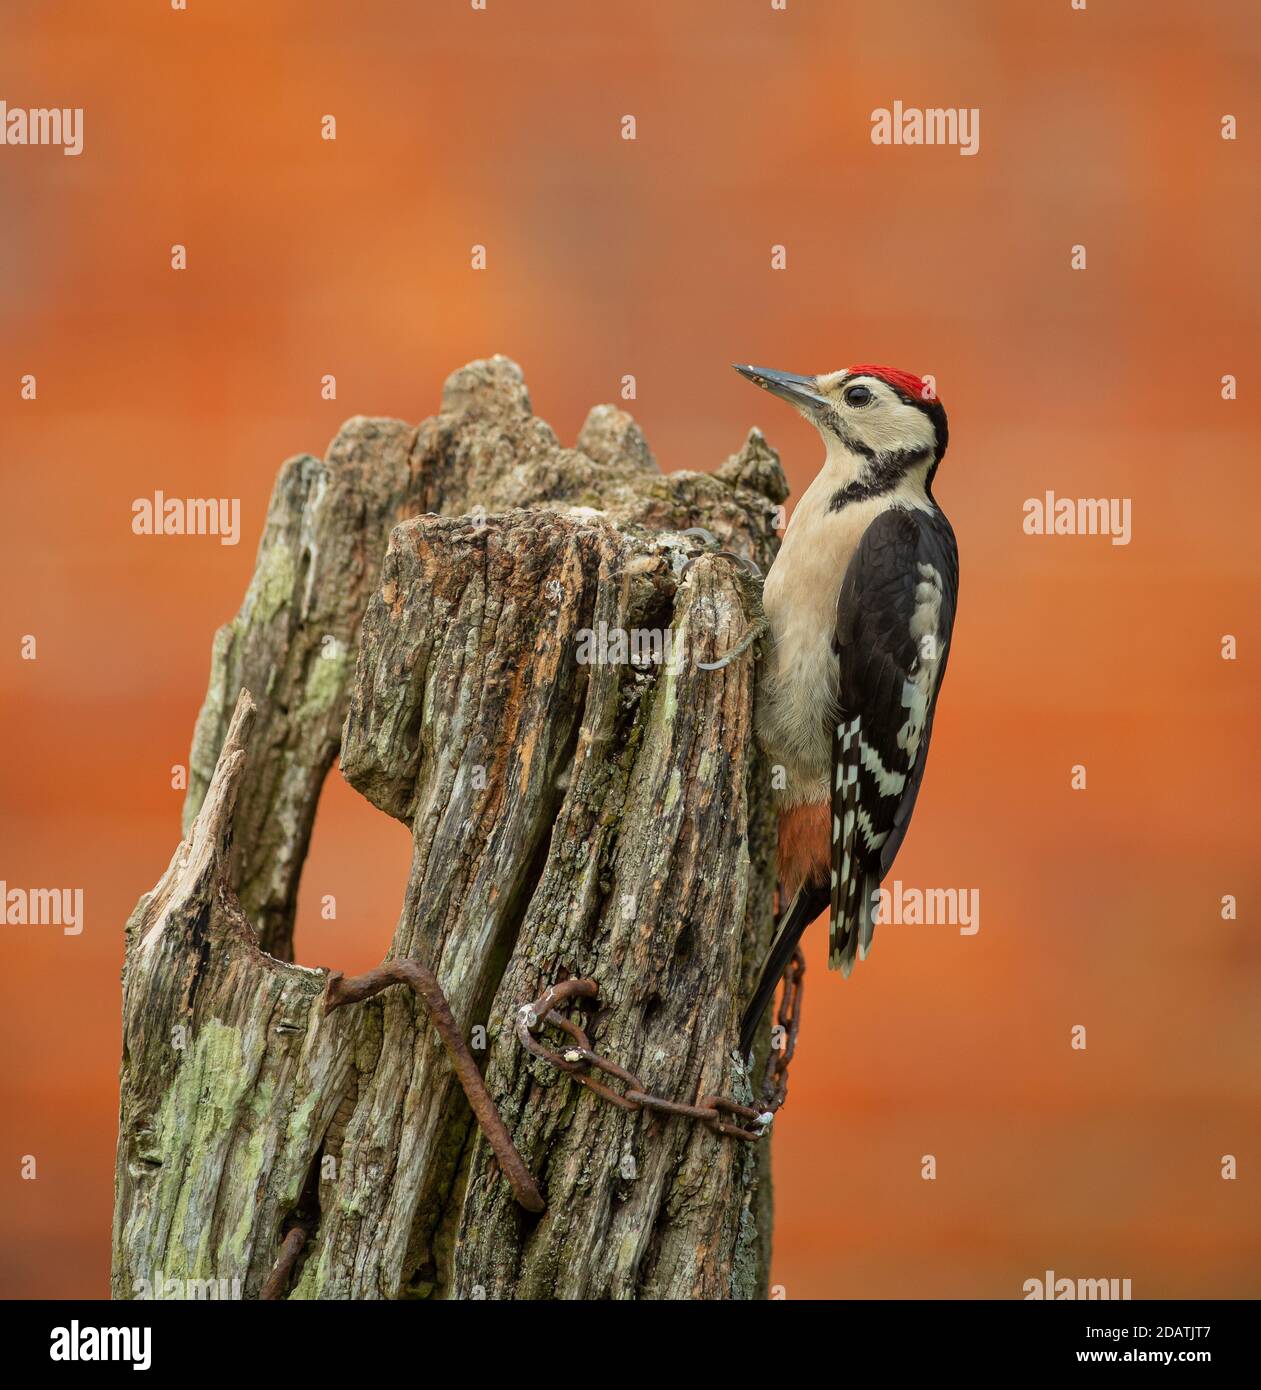 A Great Spotted Woodpecker searches for insects in an old wooden fence post on the farm. Stock Photo